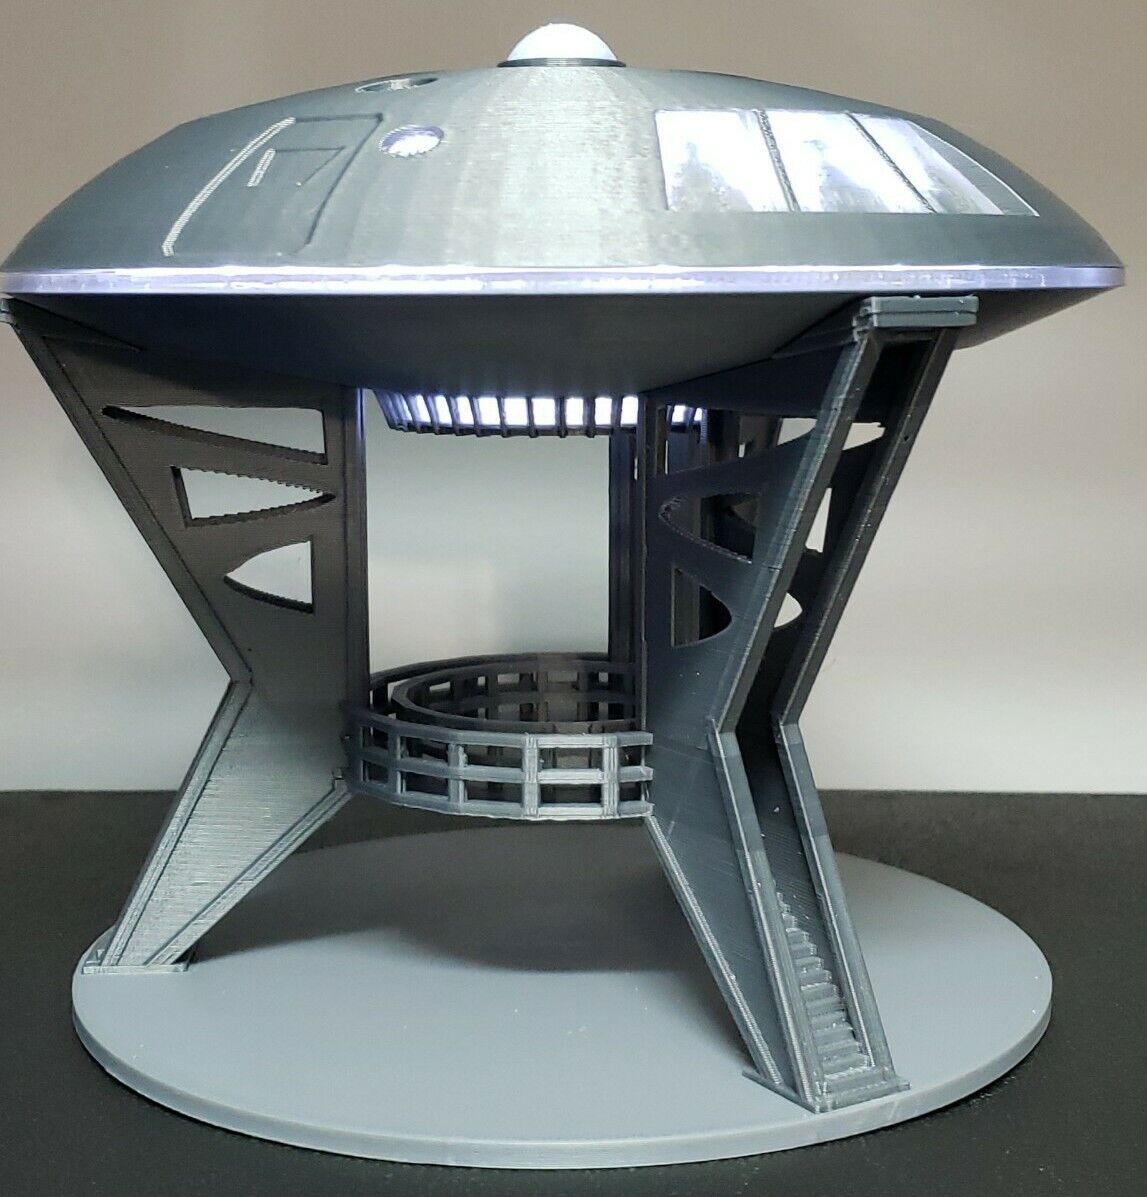 Jupiter 2 [from Lost in Space] - with Lights & Gantry Stand - Large